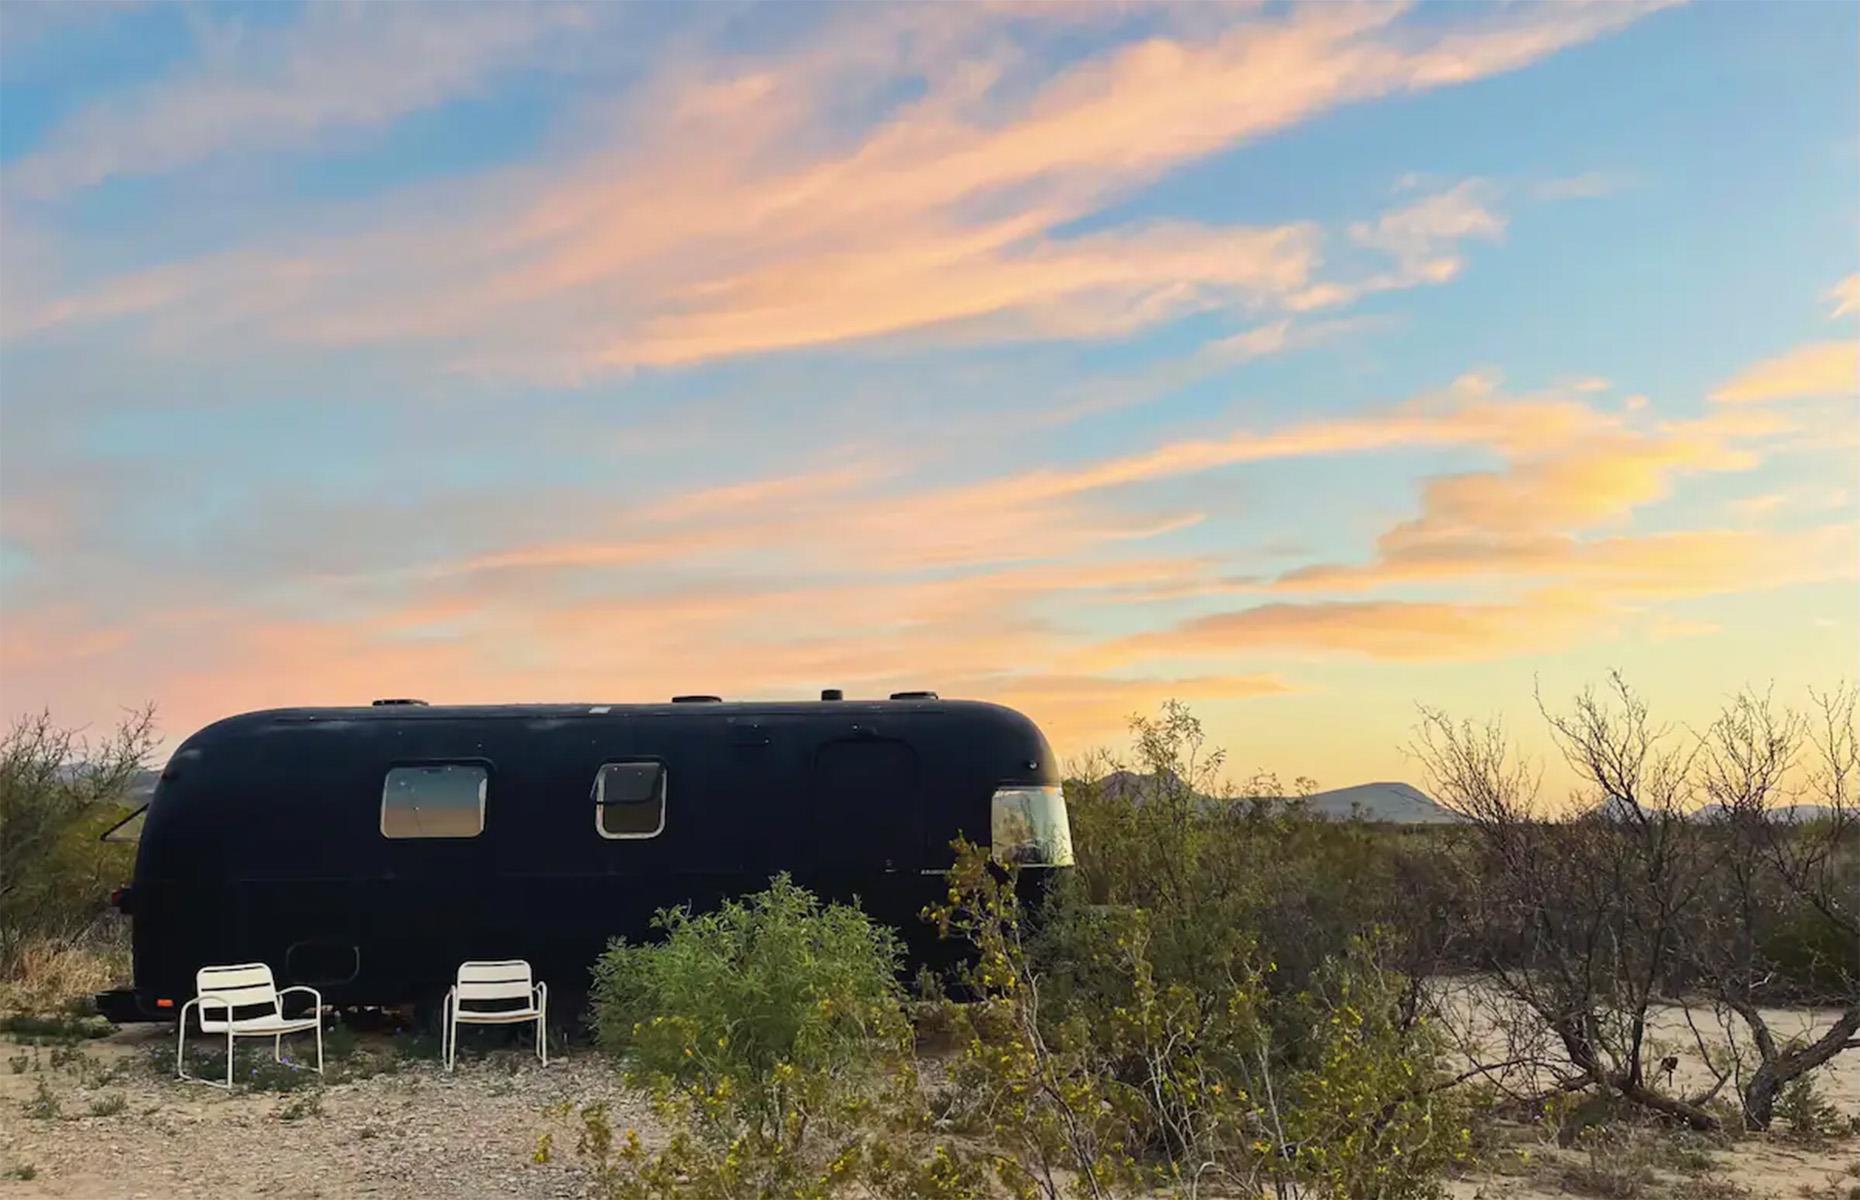 <p>This sleek black Airstream, located within Terlingua Ranch in Texas, has been dramatically remodelled for optimal comfort and style.</p>  <p>Black Moon, as the Airstream has been dubbed, has been designed to maximise the breathtaking desert landscape surrounding it, with a grilling area and firepit provided so you can enjoy a cookout under the stars.</p>